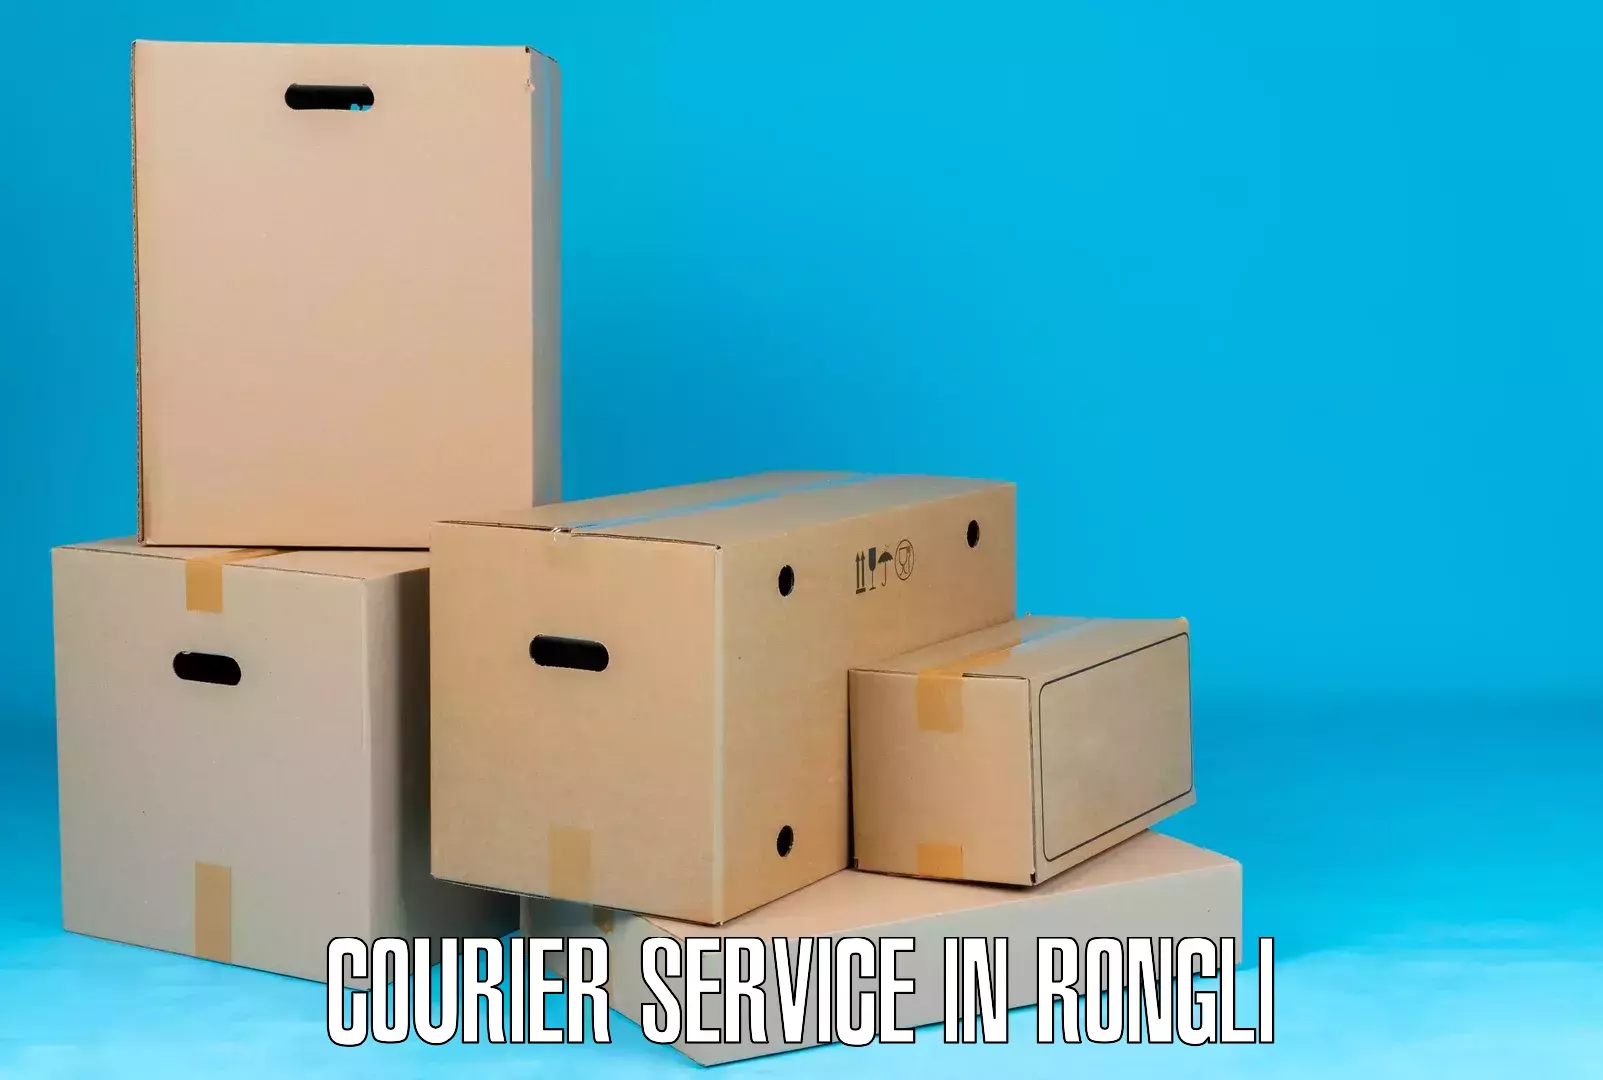 Advanced shipping technology in Rongli